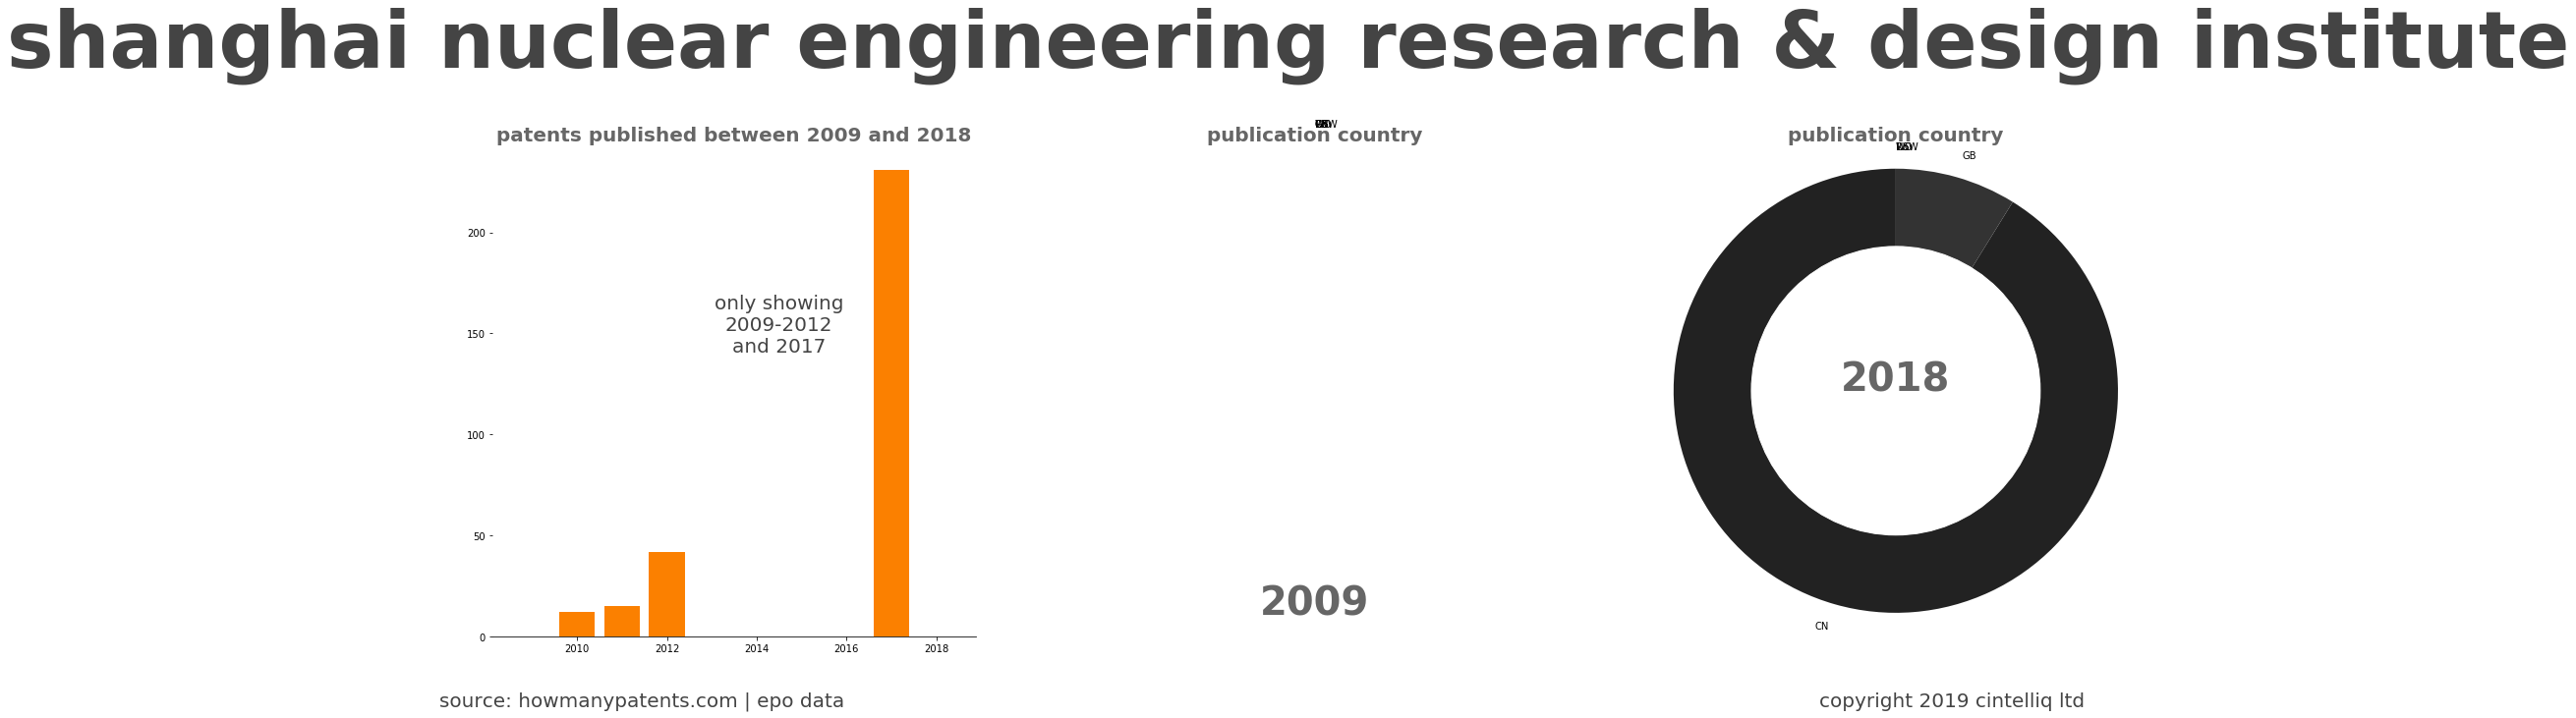 summary of patents for Shanghai Nuclear Engineering Research & Design Institute